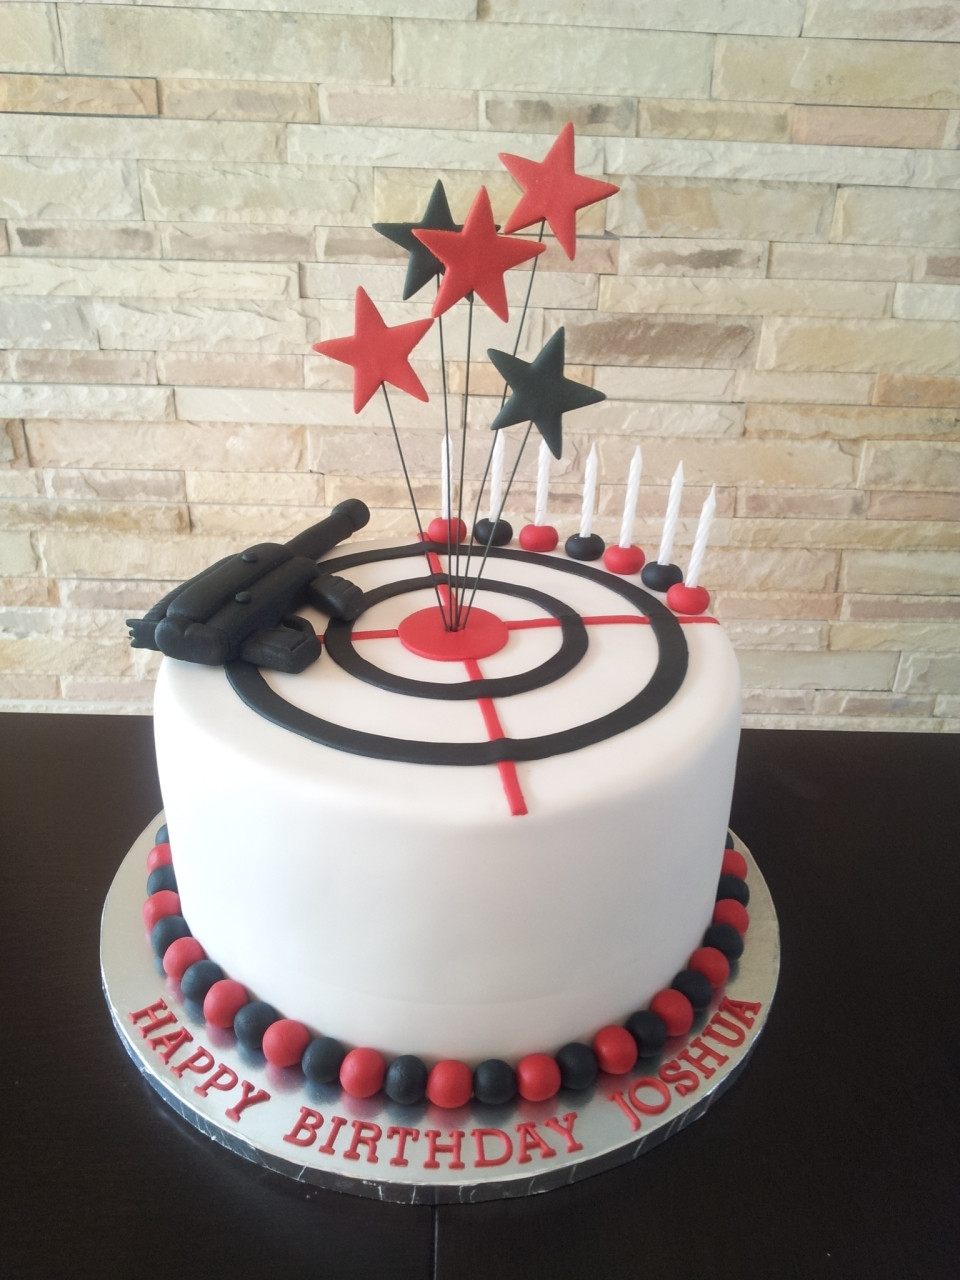 Target Birthday Cakes
 Laser Tag Themed Boy s Birthday Cake CakeCentral